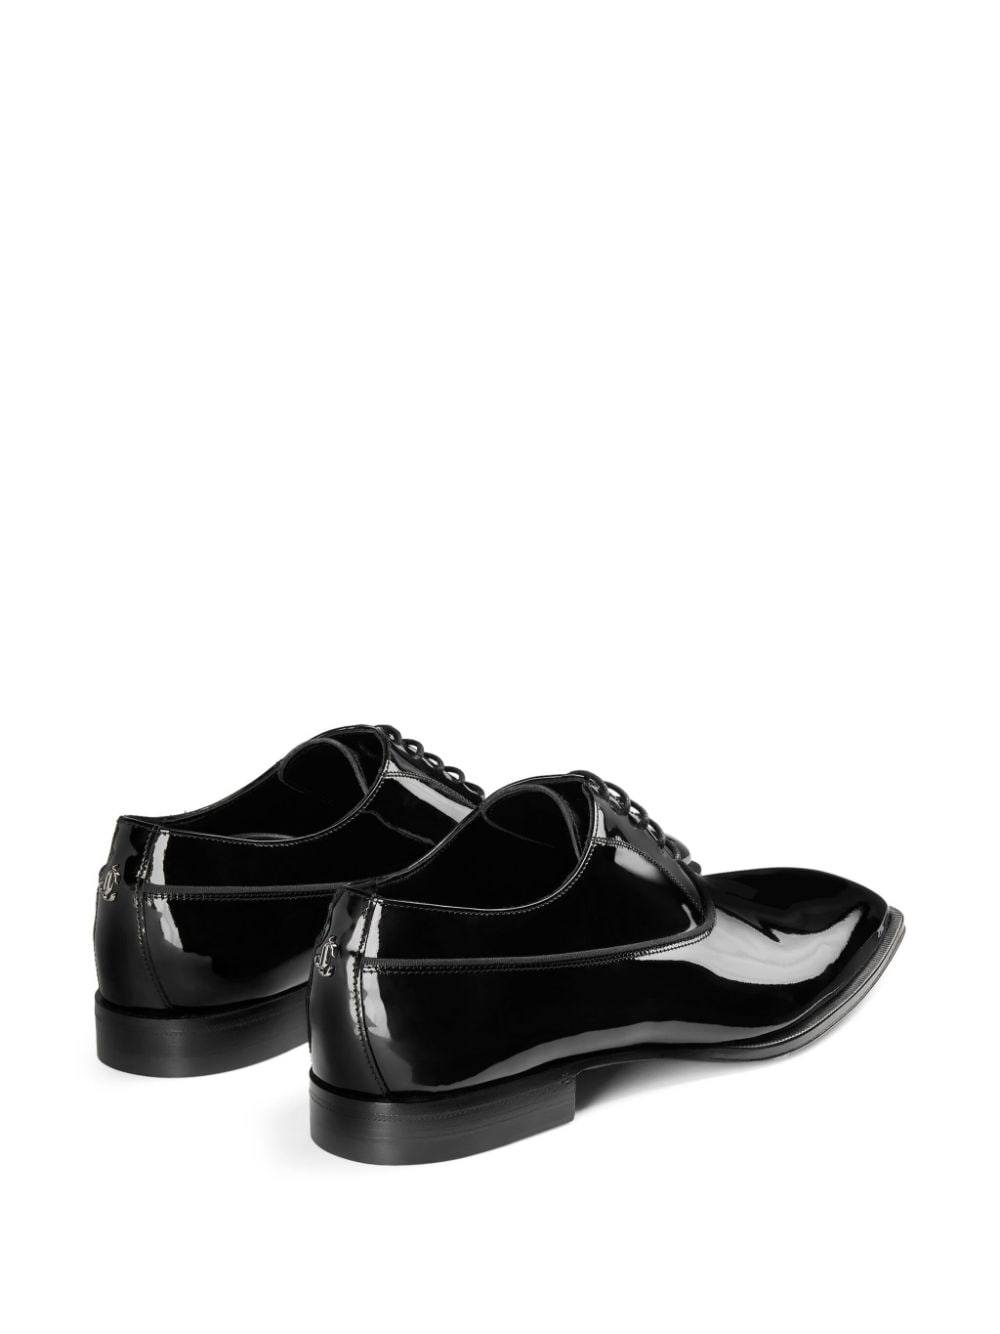 Shop Jimmy Choo Foxley Patent Leather Oxford Shoes In Black